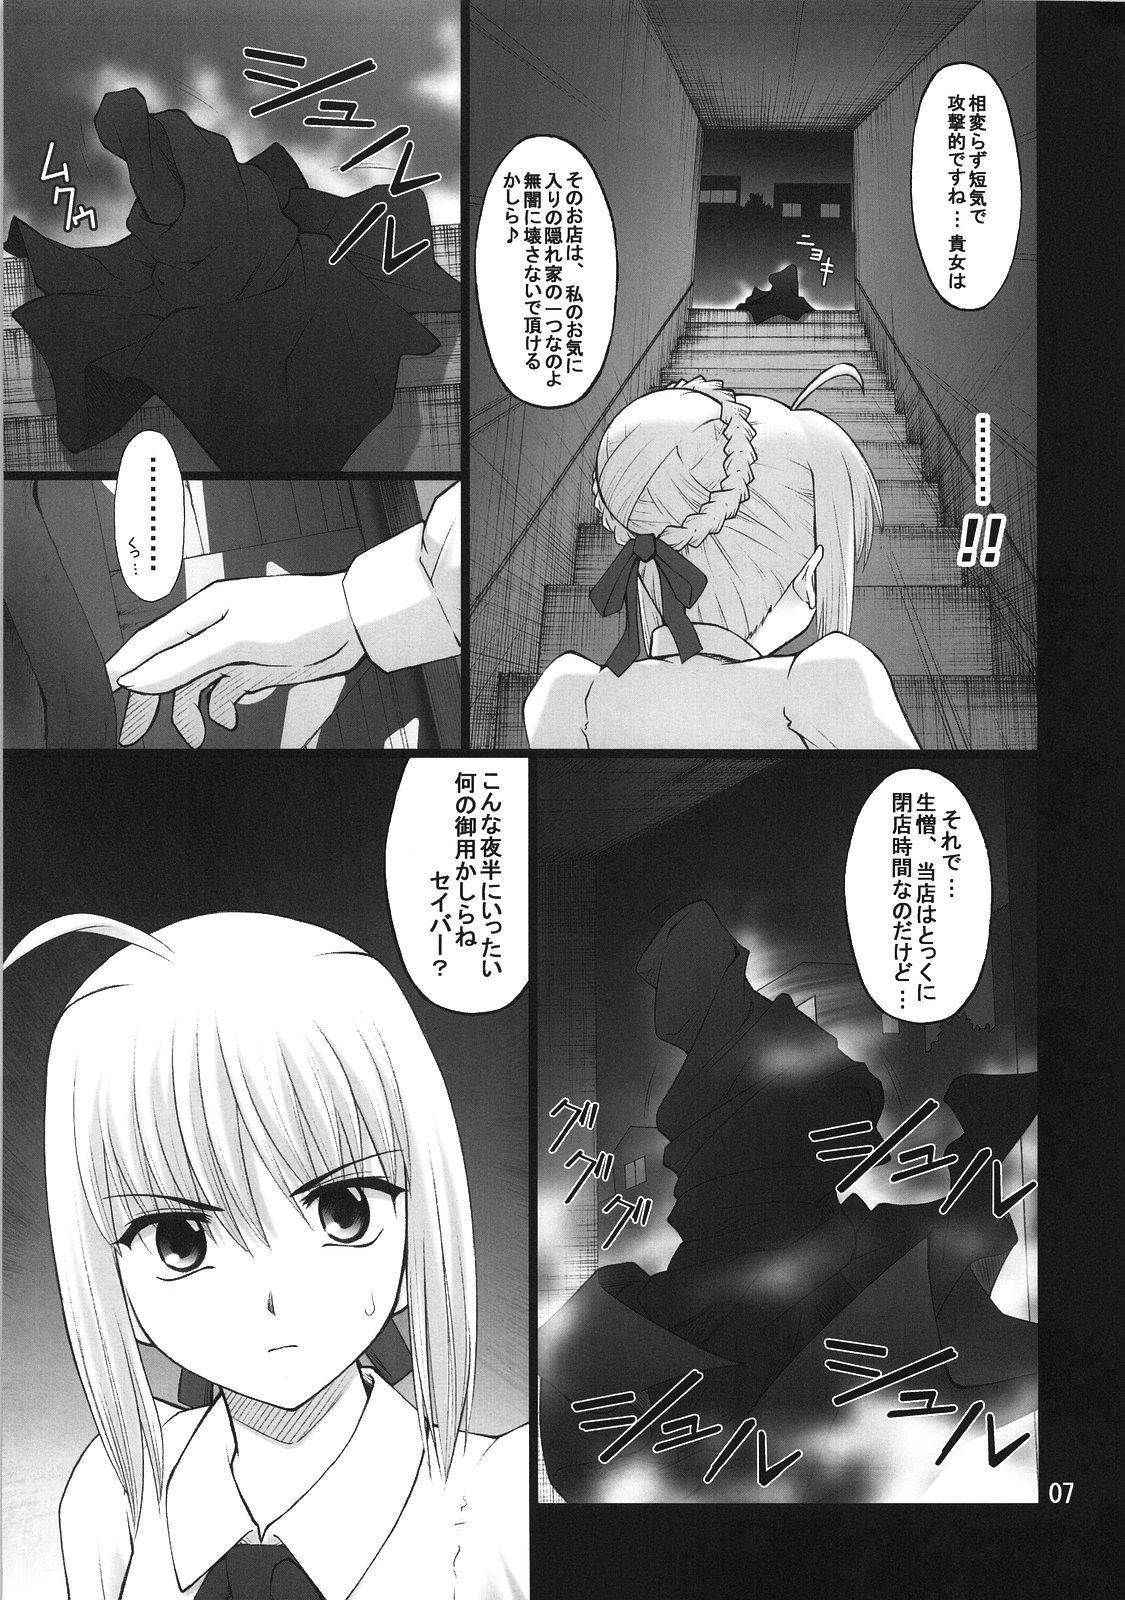 Leather Grem-Rin 3 - Fate stay night Fate hollow ataraxia Role Play - Page 6